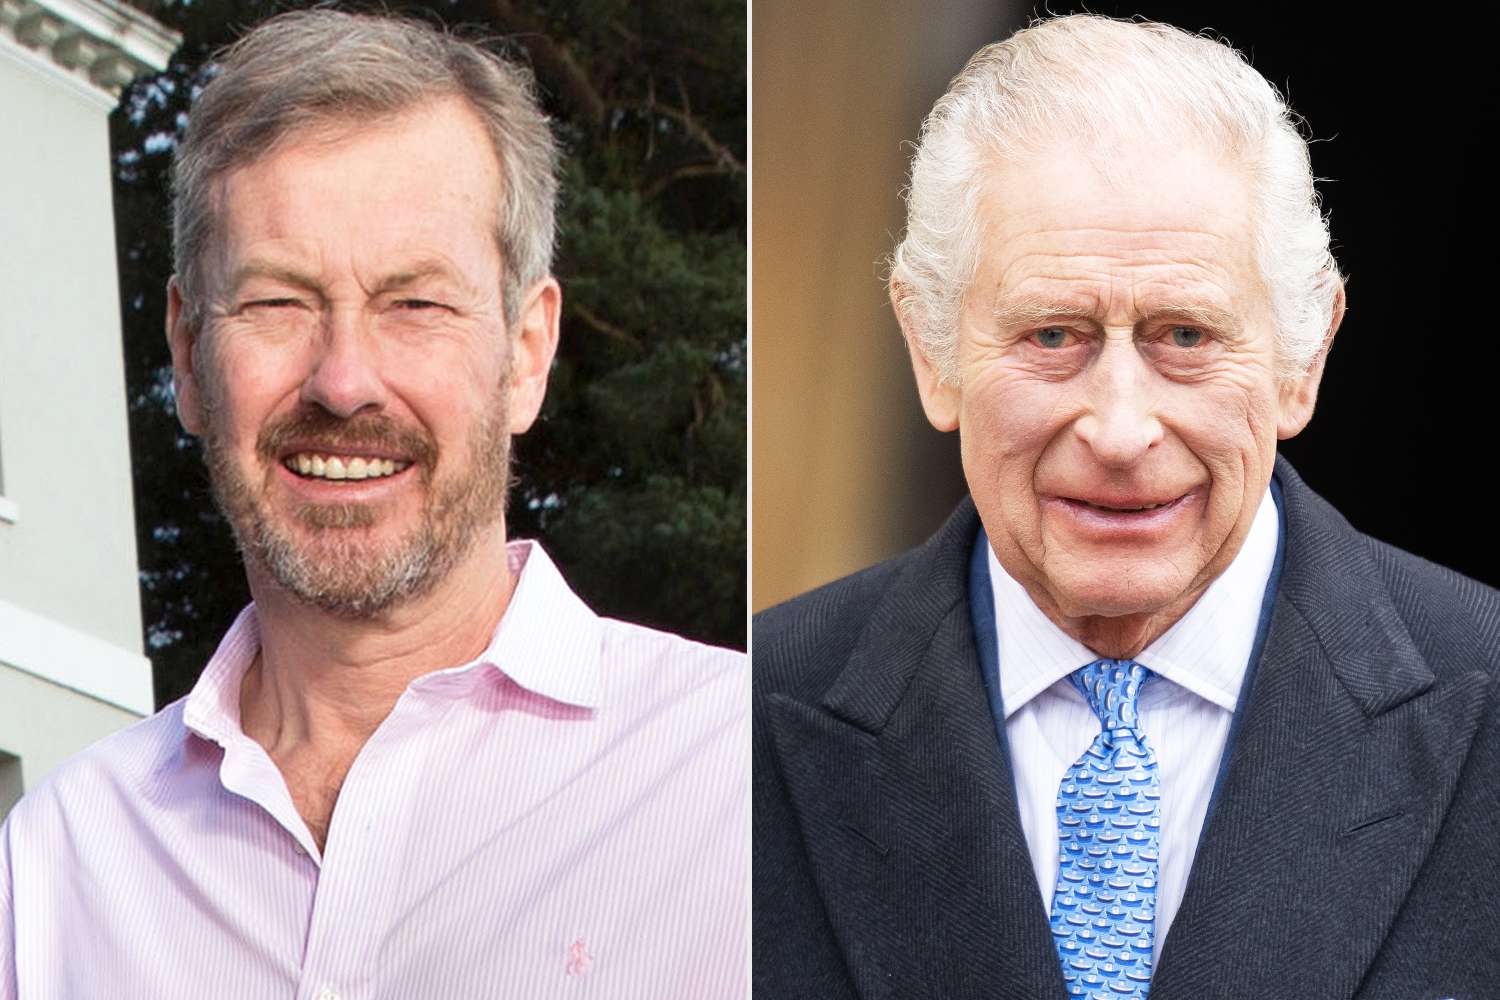 King Charles’ Cousin Lord Ivar Mountbatten Joins The Traitors: Meet the Gay Royal Family Member Turned Reality Star